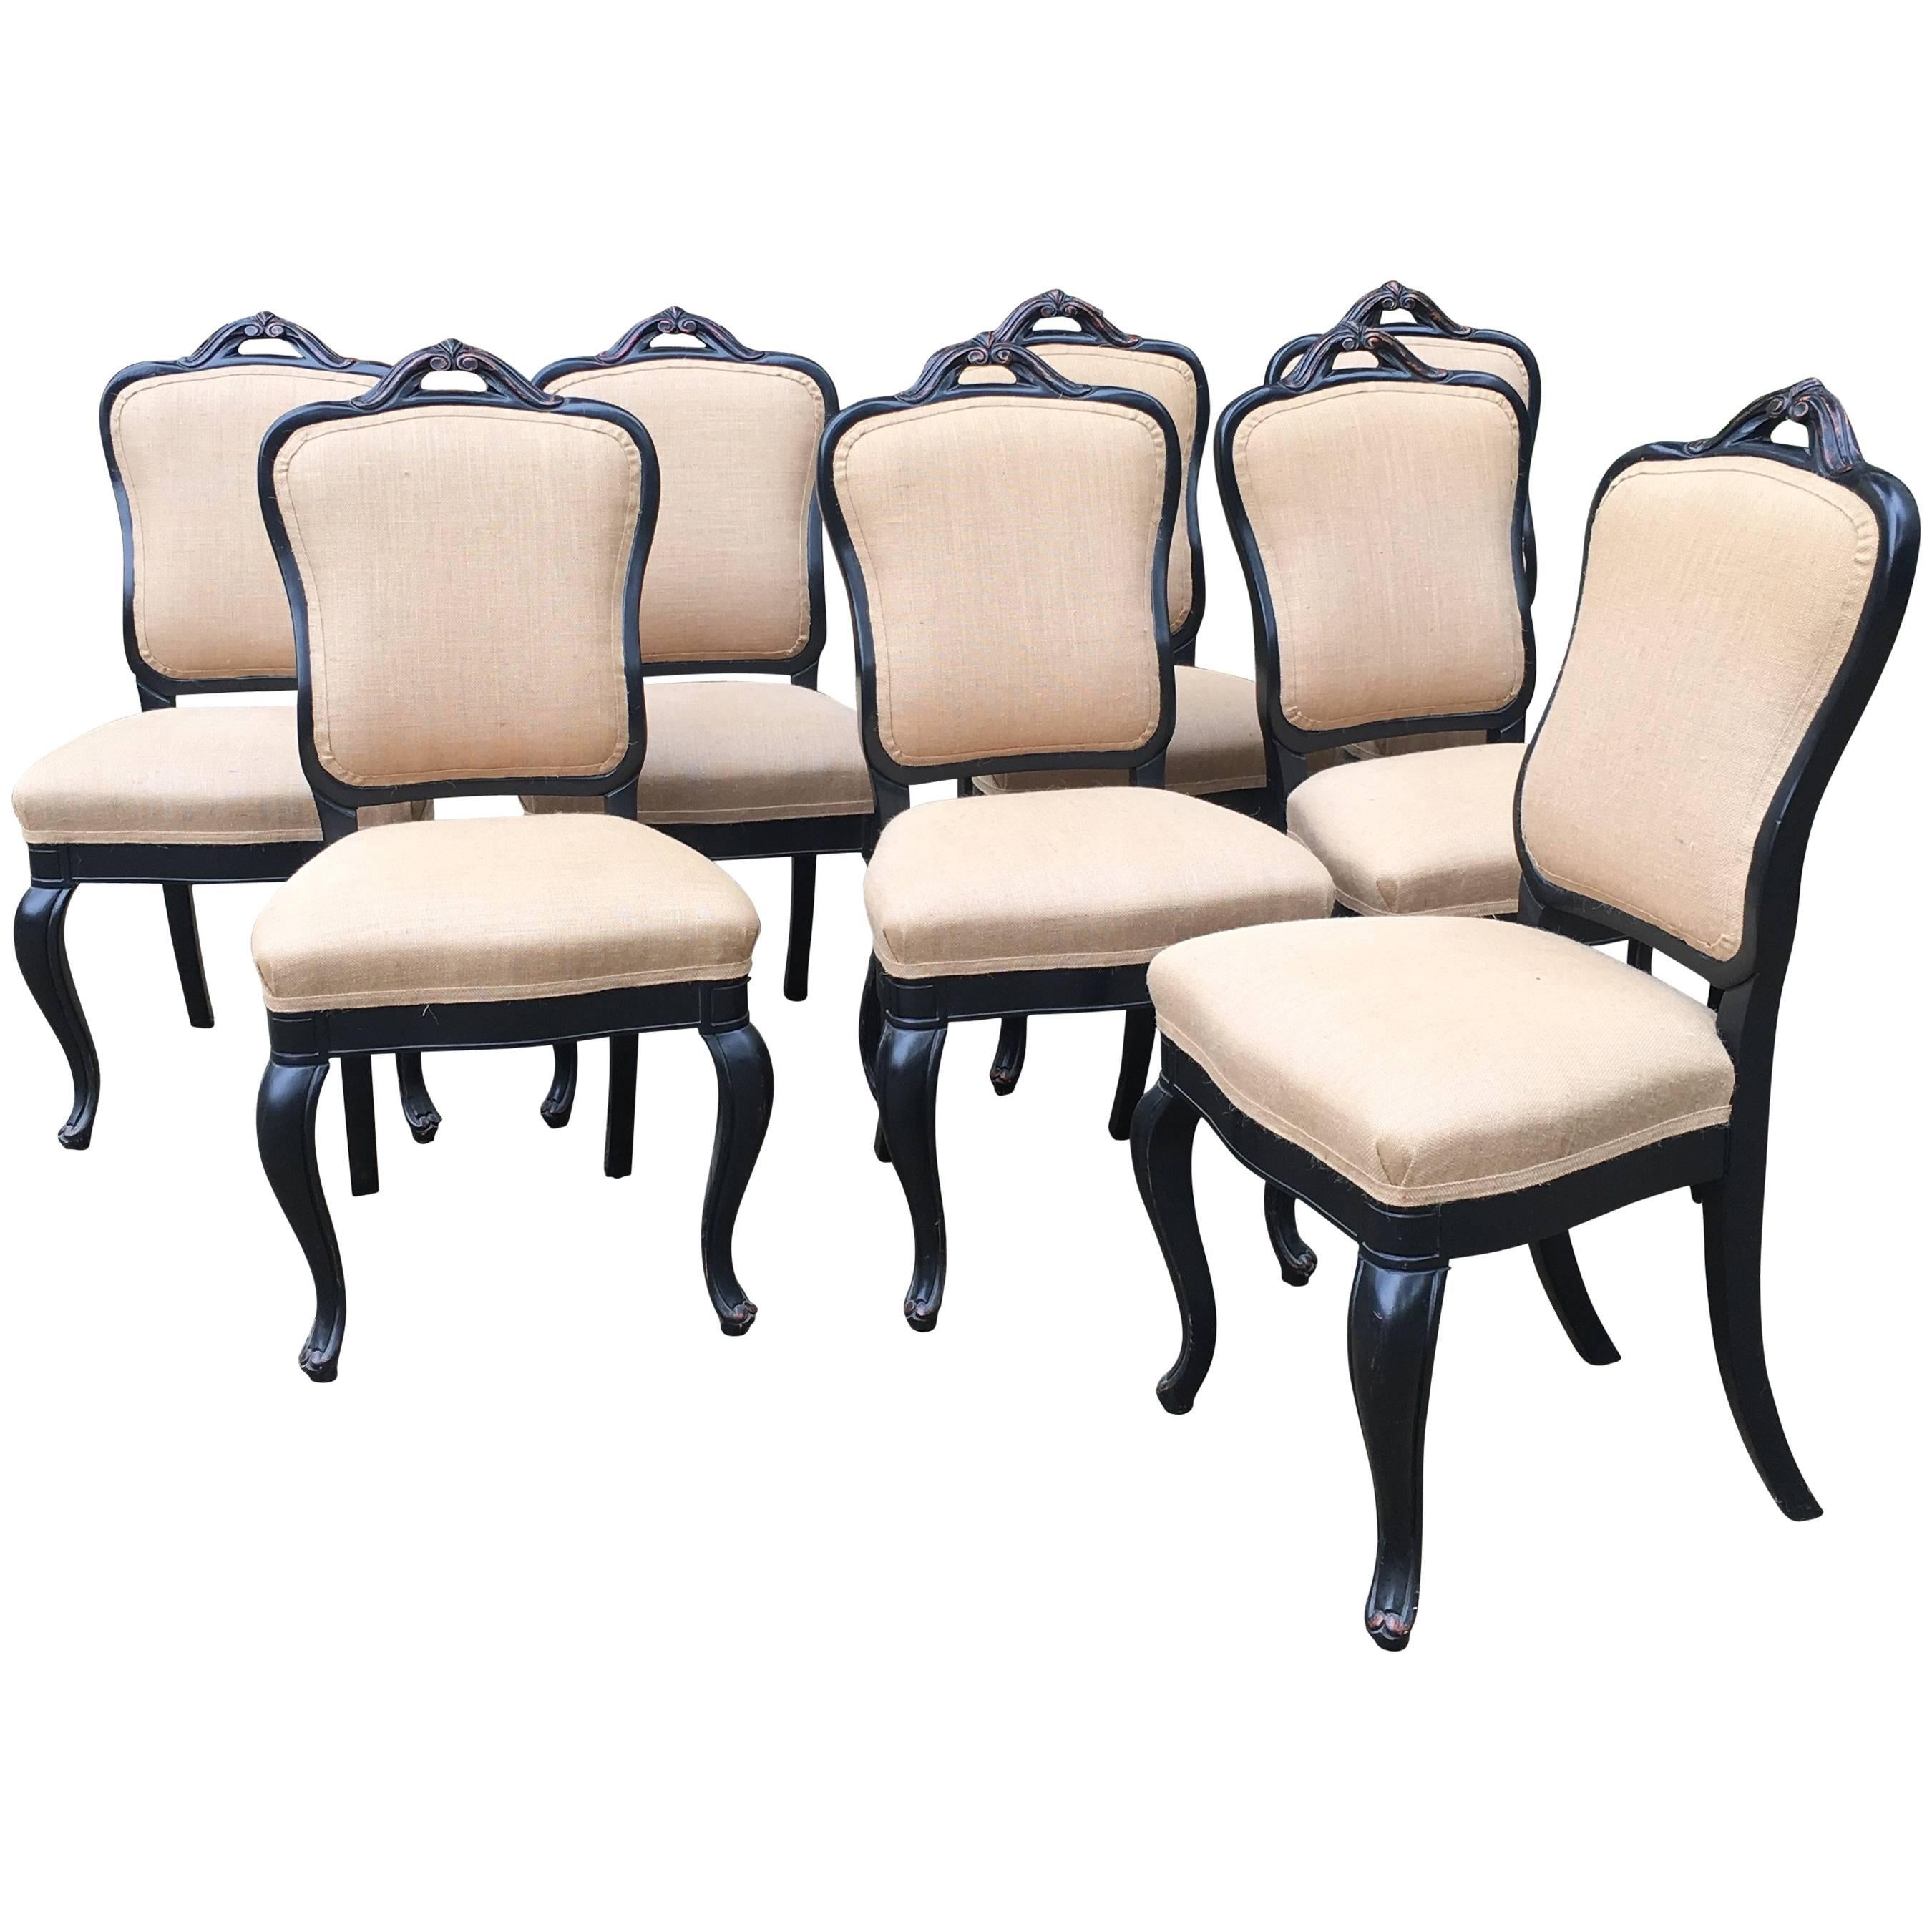 Italian Chairs with Inlaid Coated Wood and Juta in the Manner of Luis Philip For Sale